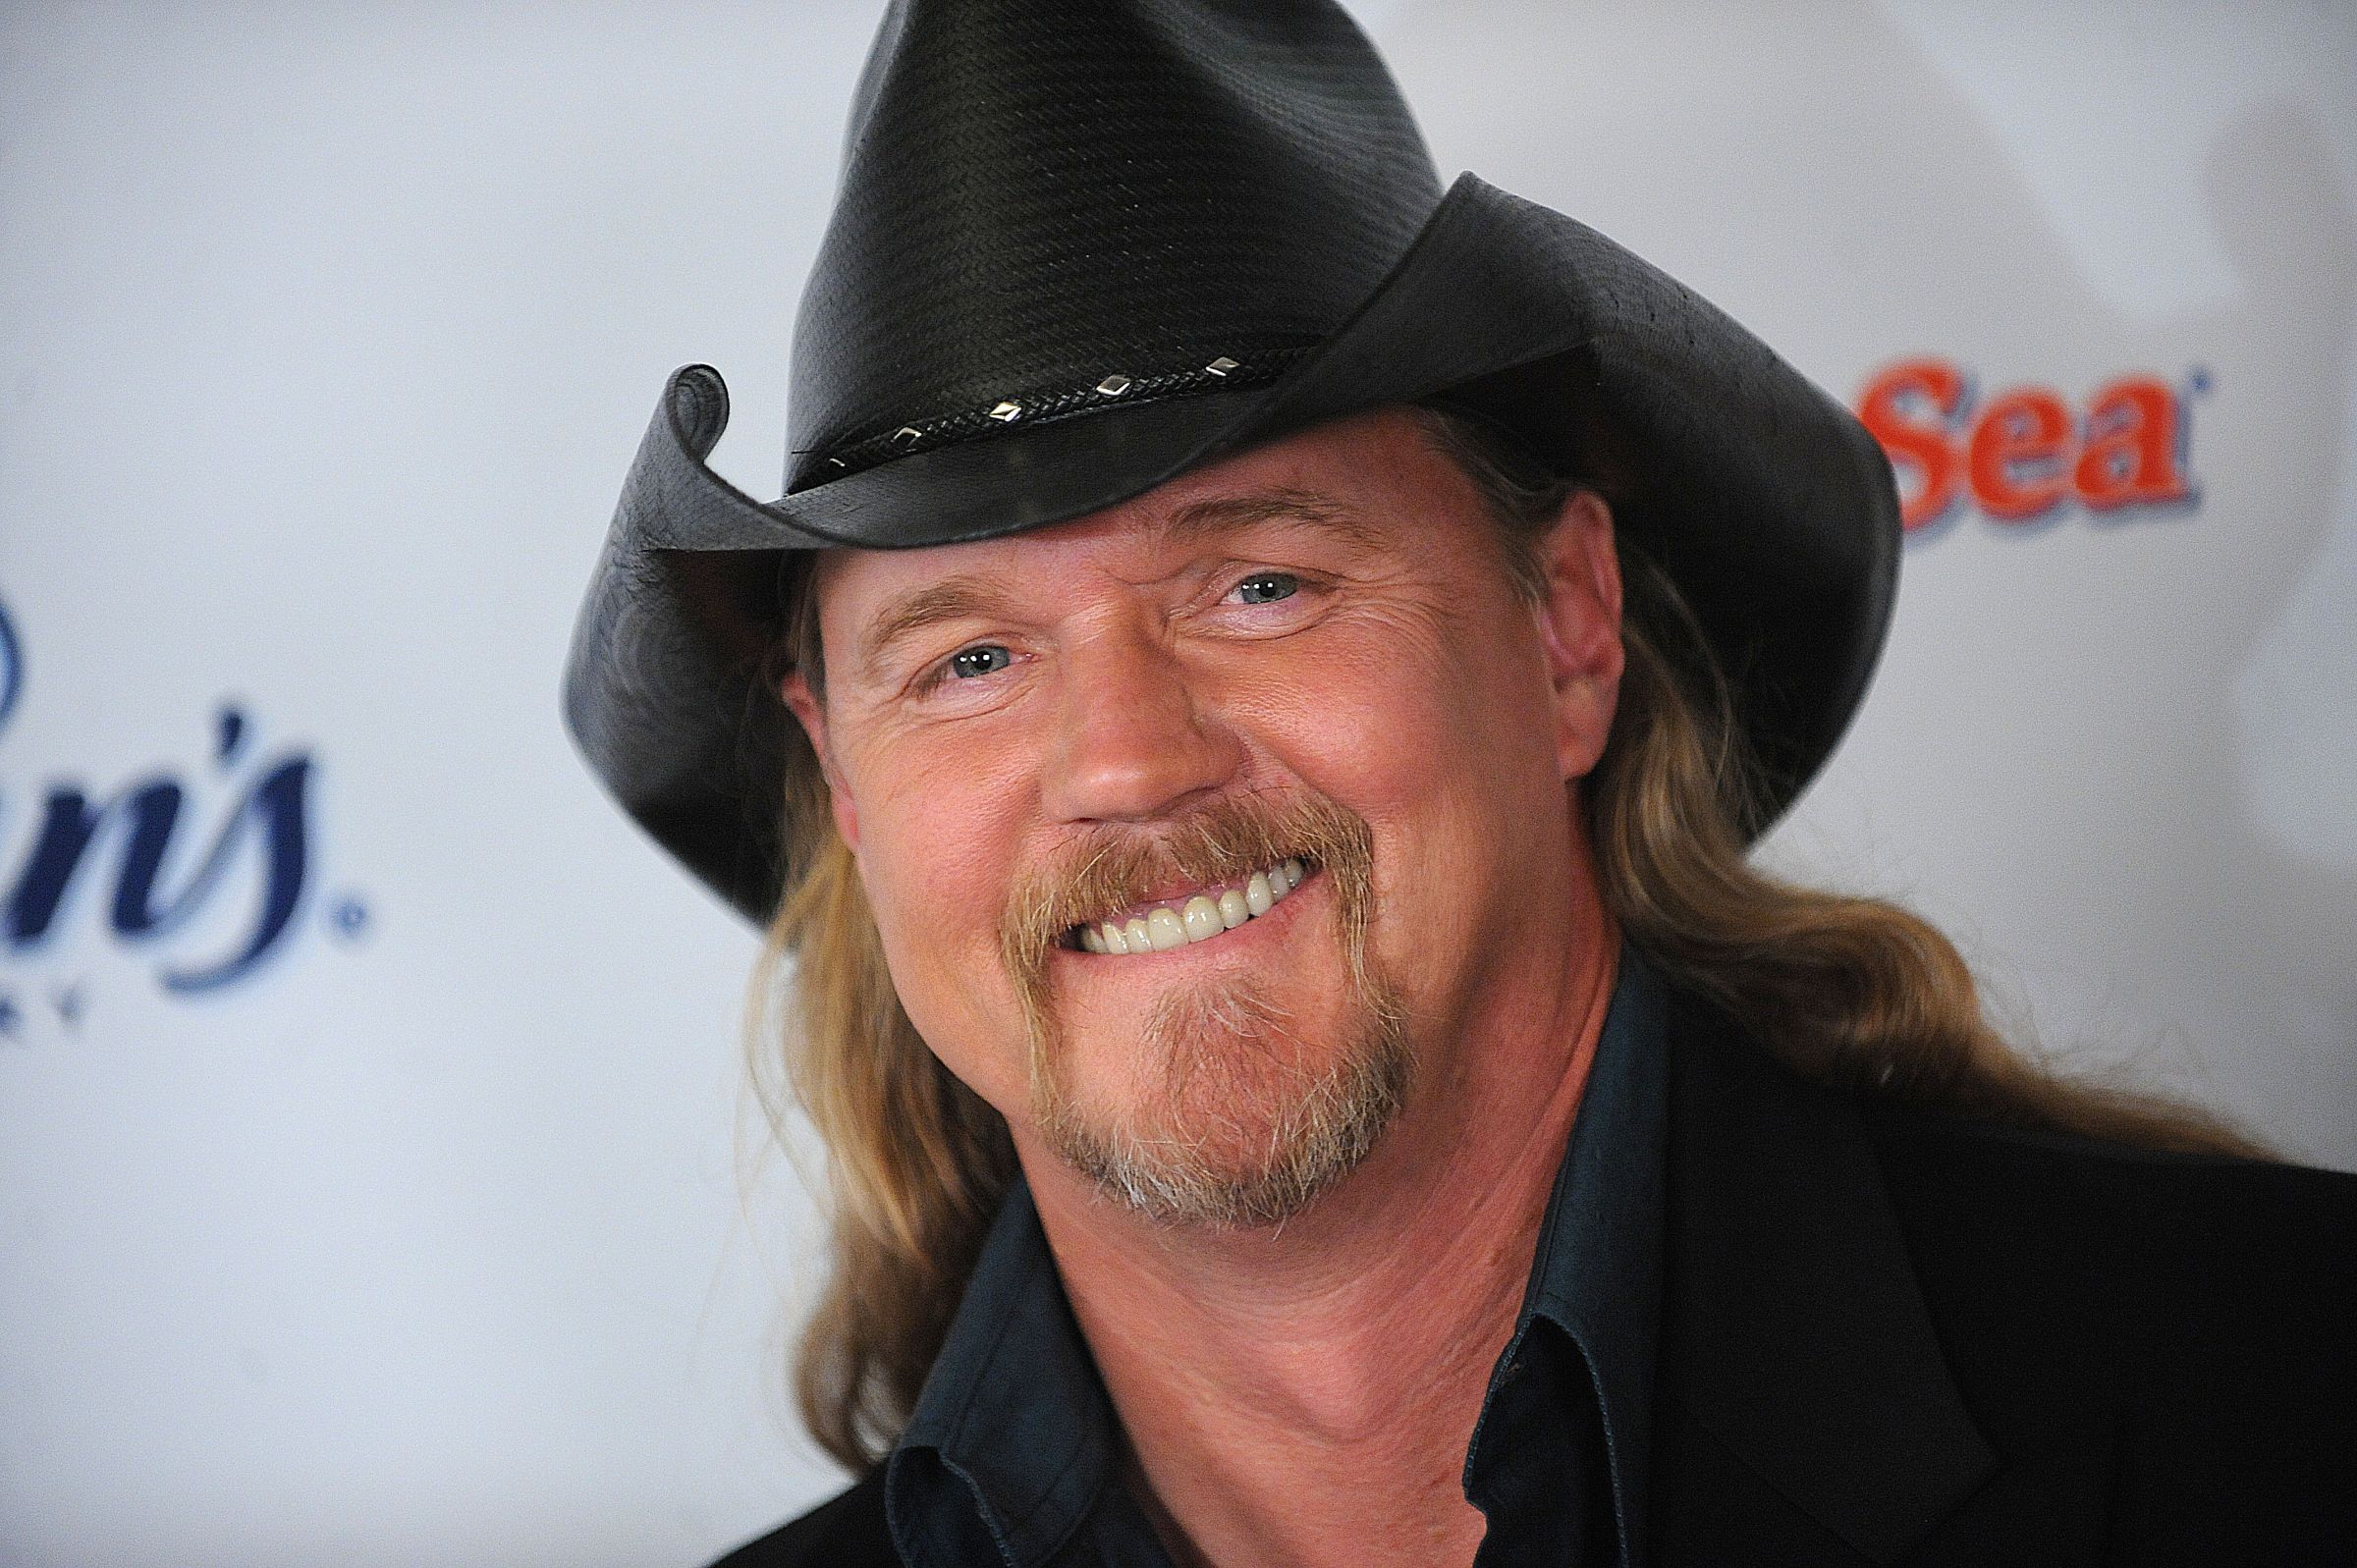 More Pictures Of Trace Adkins. trace adkins images. 